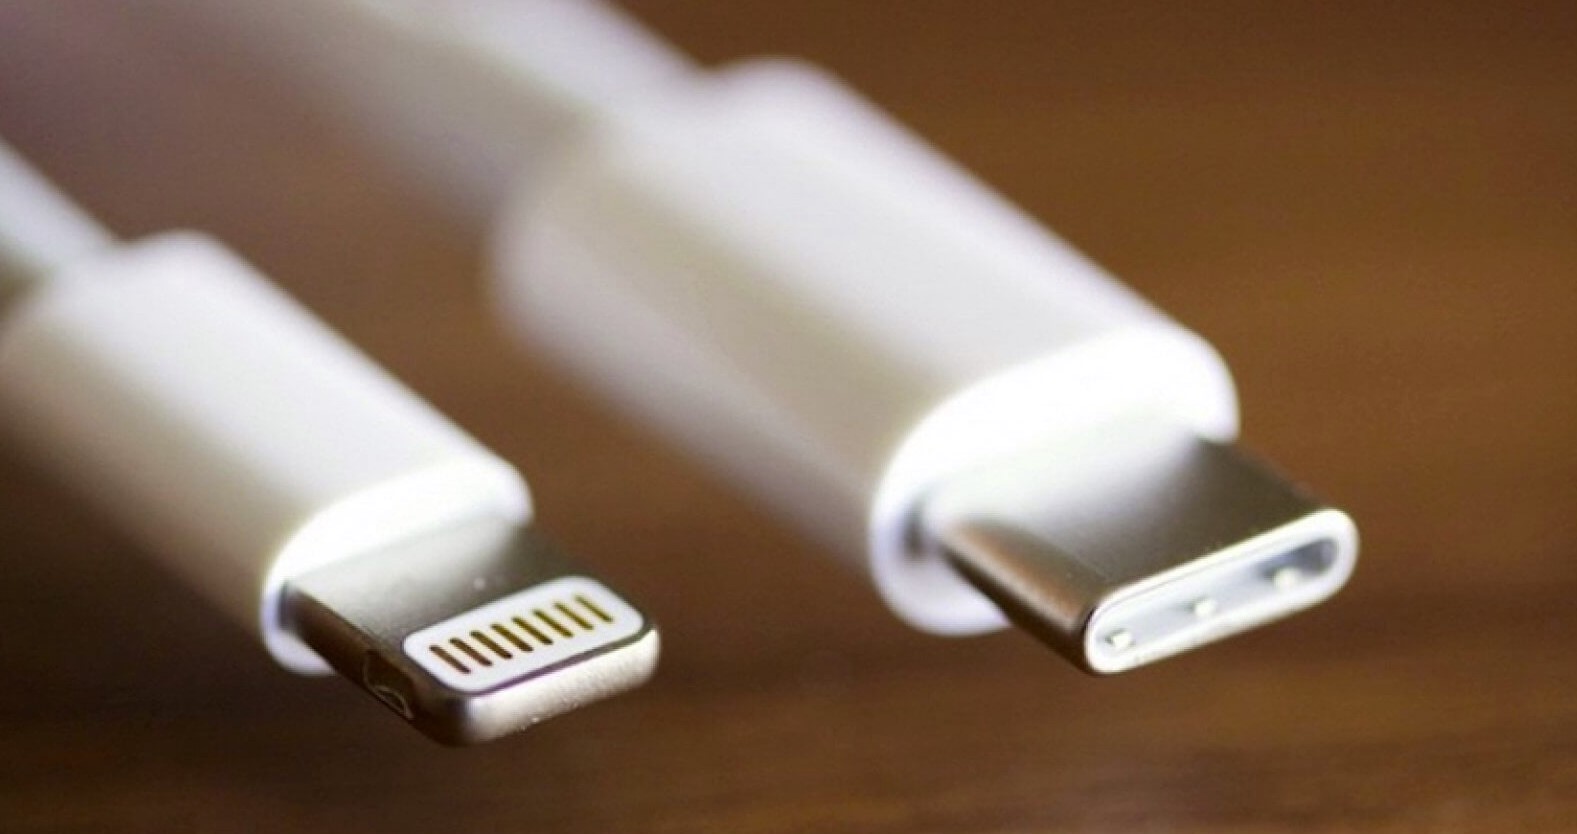 EU about to finalize law on a common charger standard on June 7